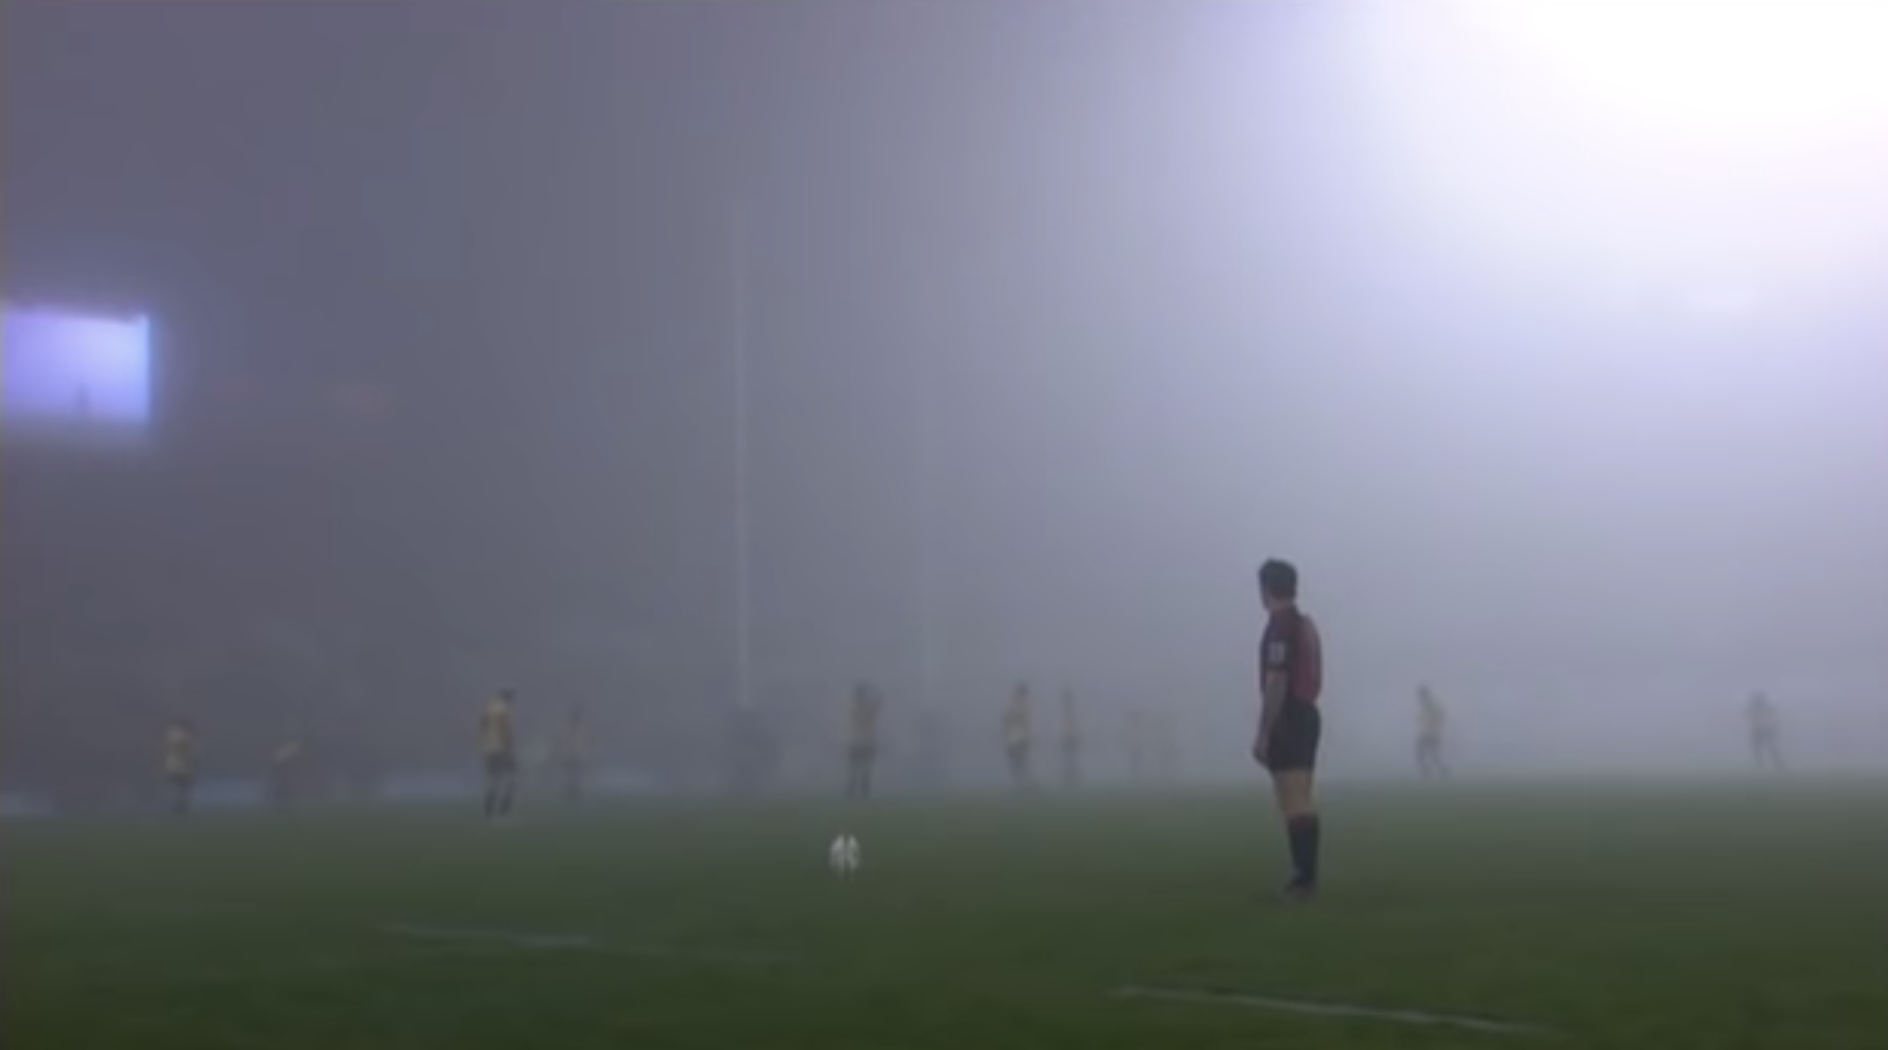 THROWBACK: Surreal 2006 Super Rugby final where FOG makes match simply unwatchable